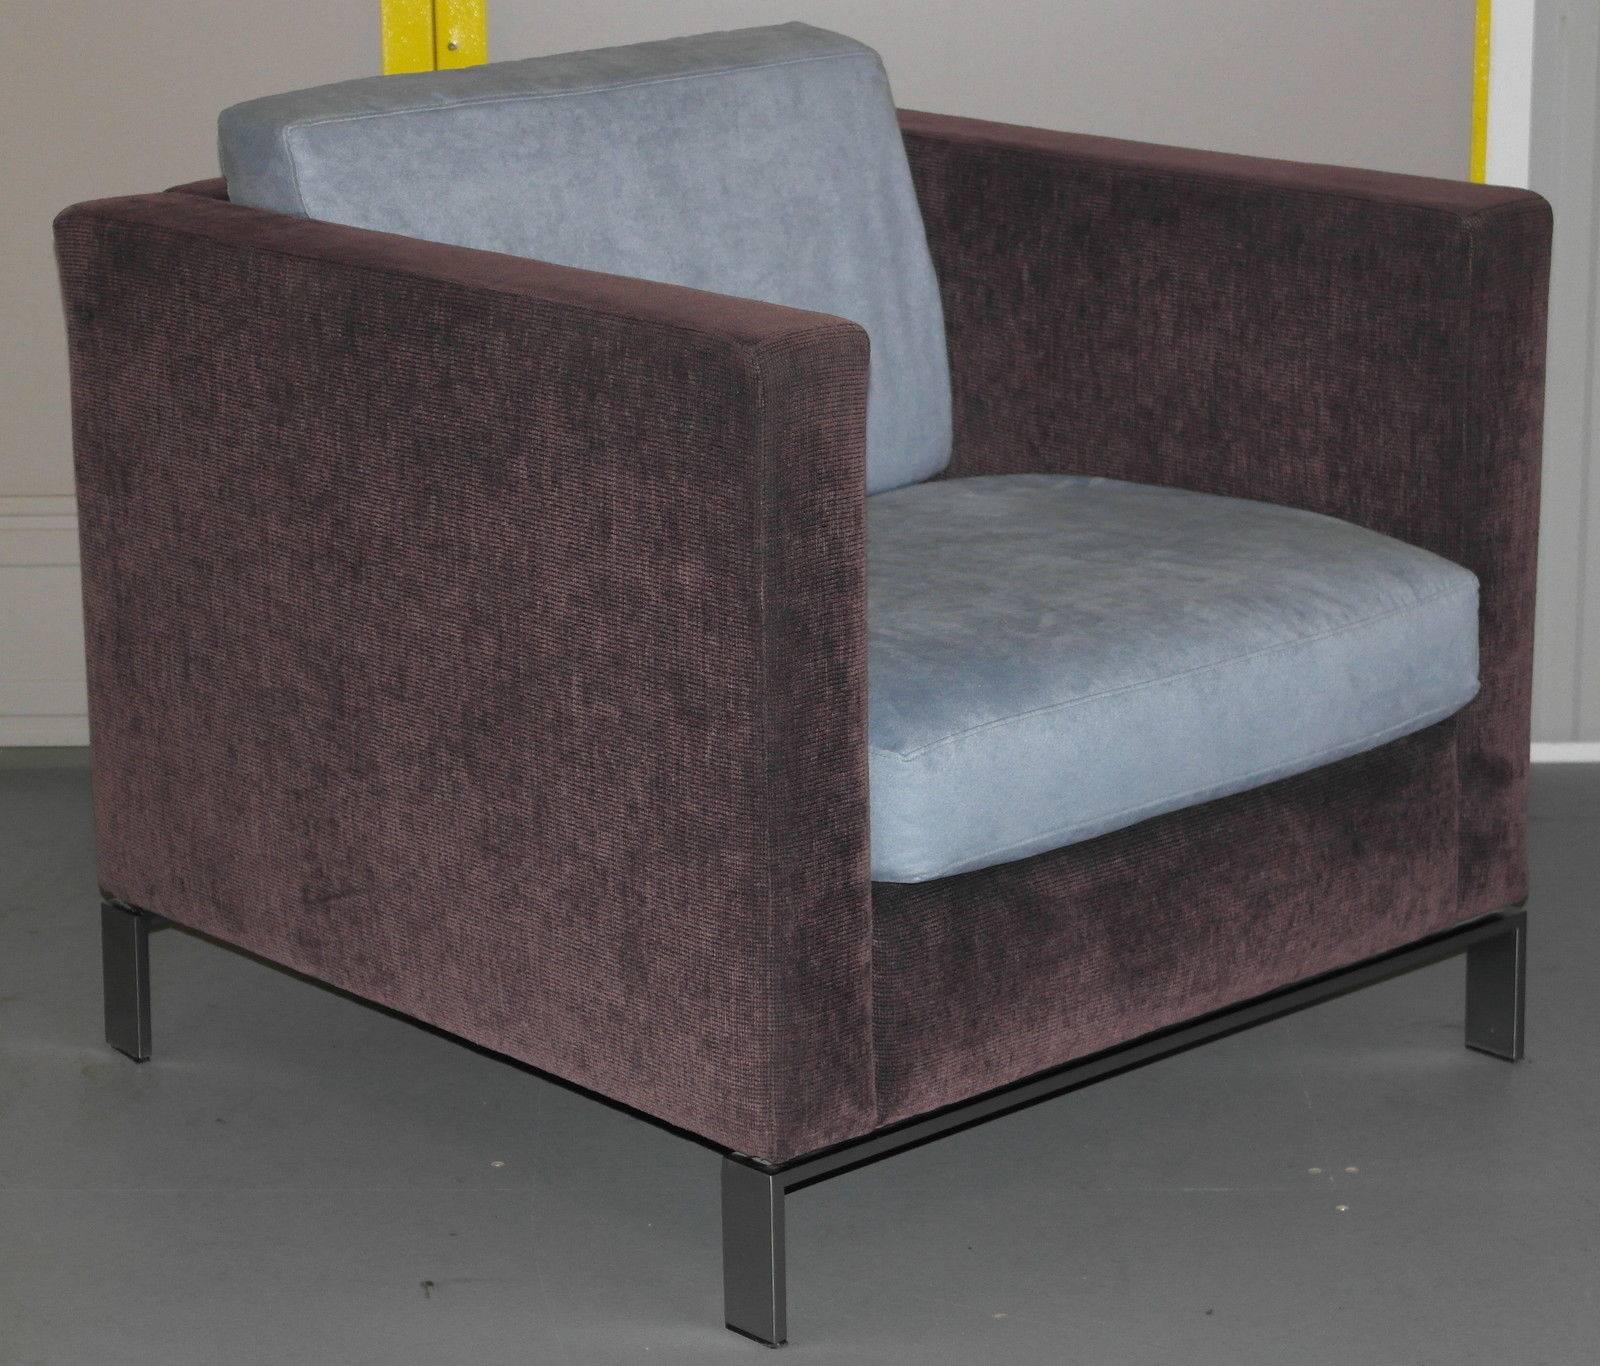 Wimbledon-Furniture

This sale is for a pair of really very rare Walter Knoll Fosta 500 armchairs

Please note the delivery fee listed is just a guide, for an accurate quote please send me your postcode and I'll price it up for you 

These chairs